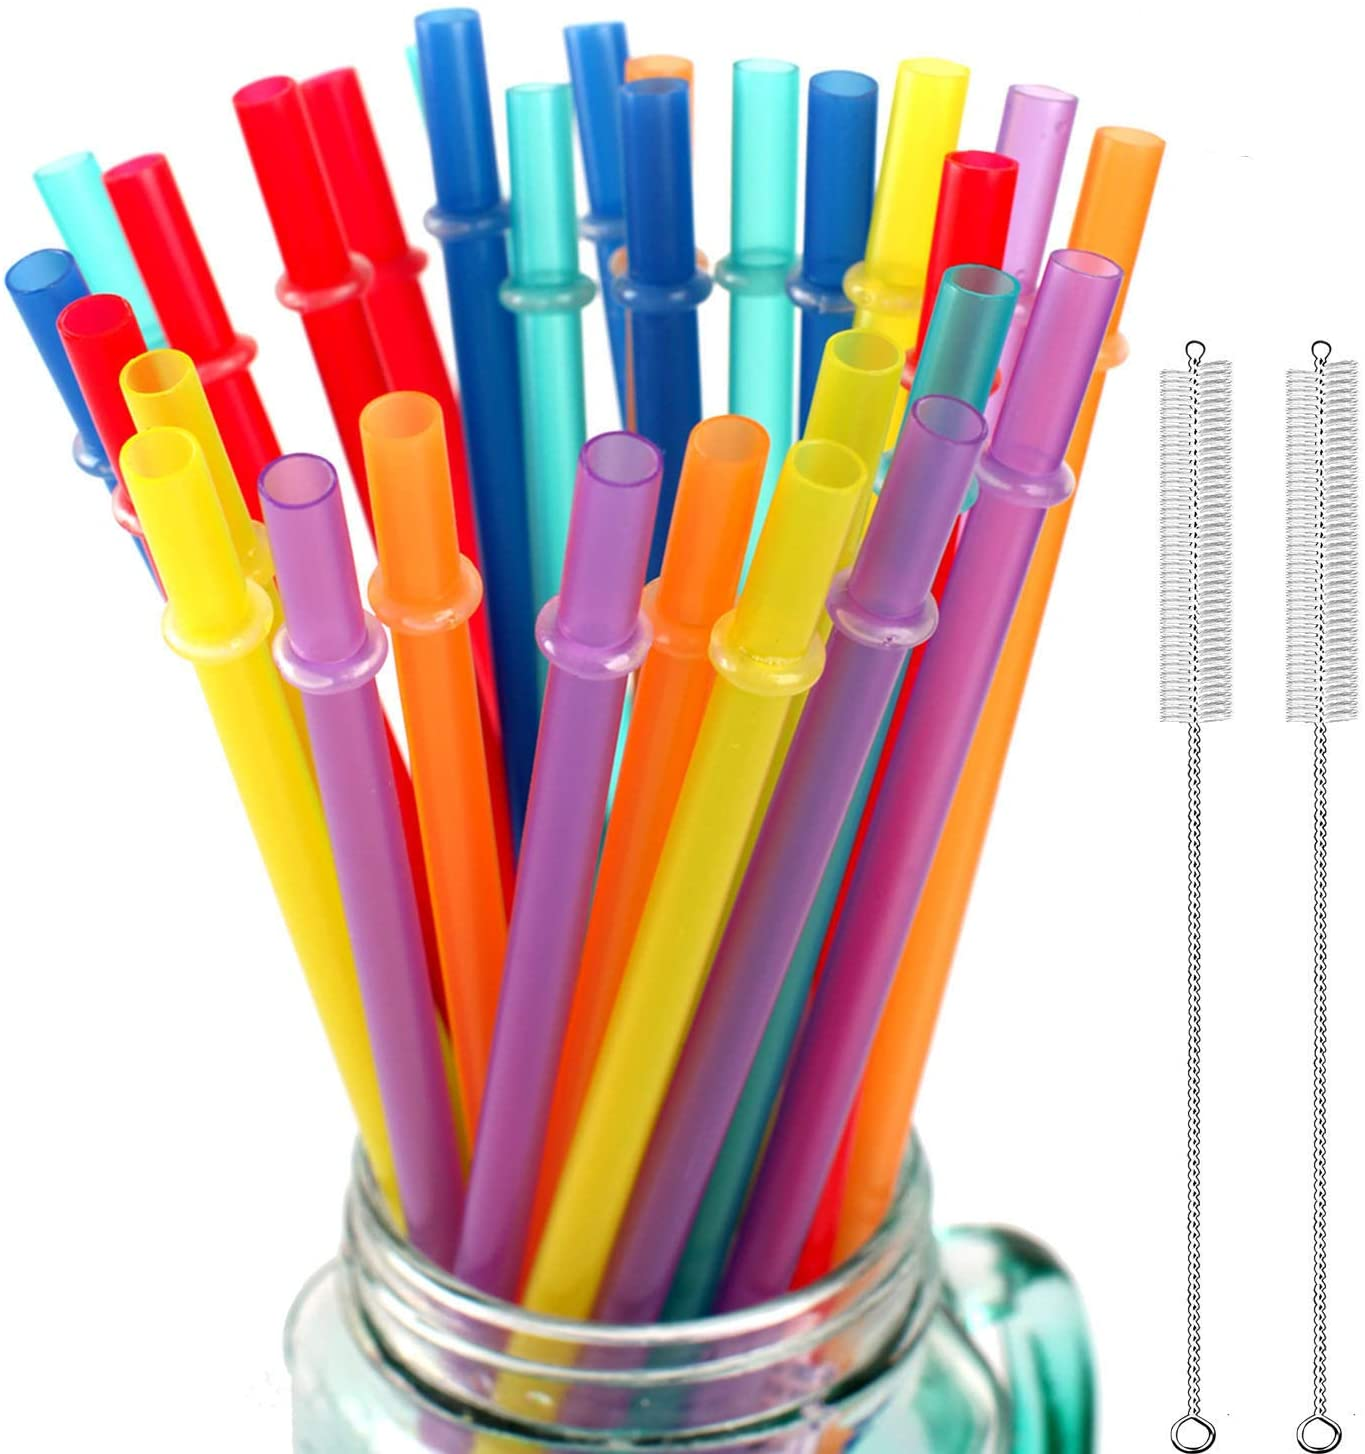 Reusable Straws Market Growing Popularity and Emerging Trend